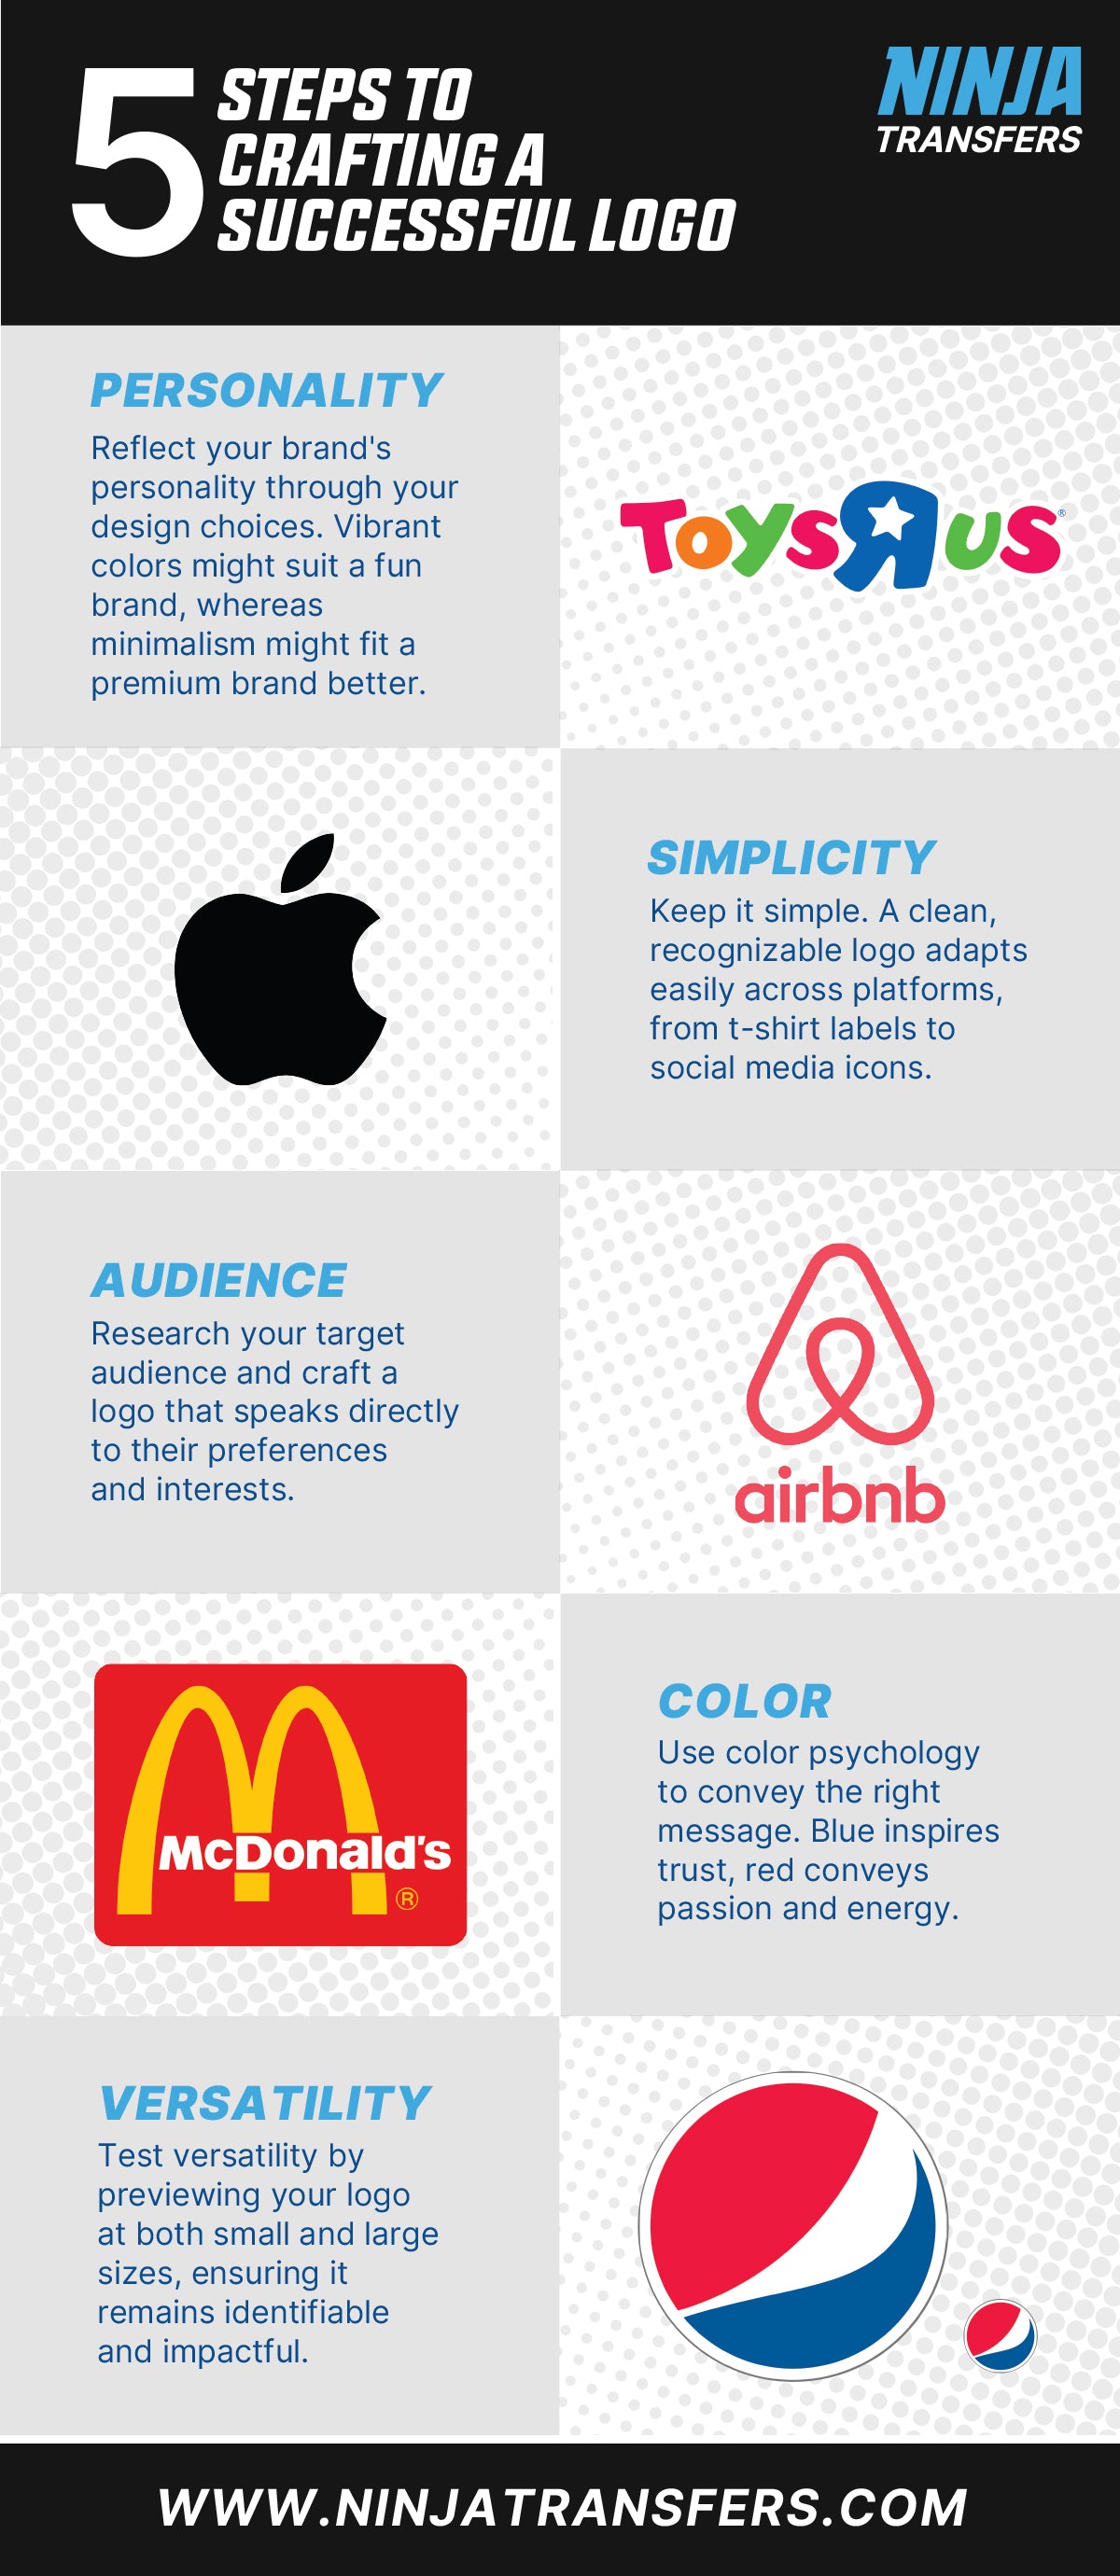 Examples of successful logos, showing different styles and approaches